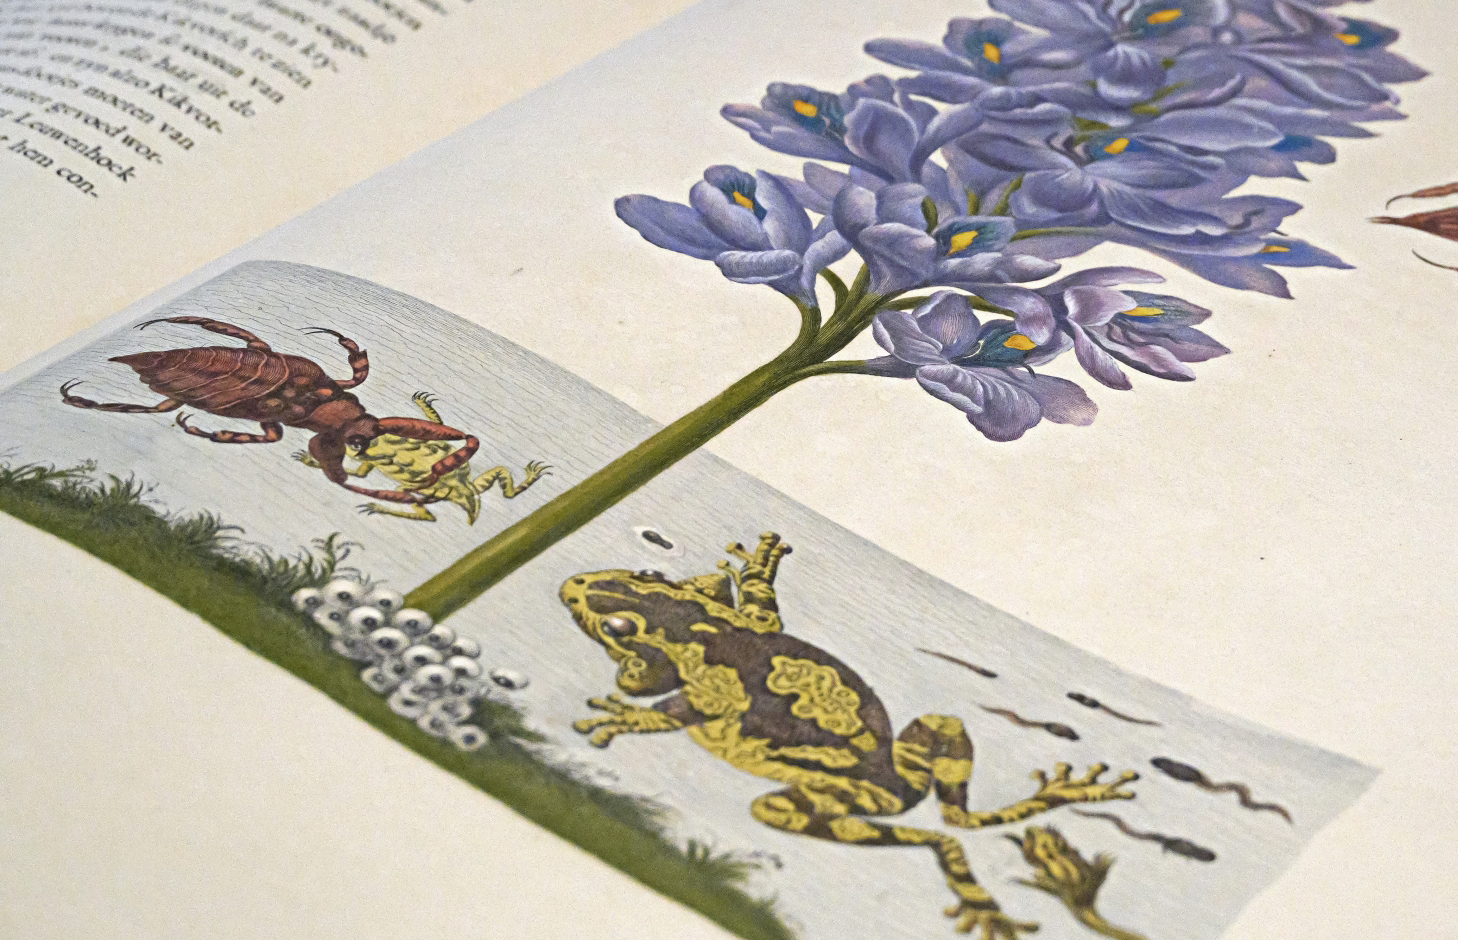 Illustration in a book of a frog.